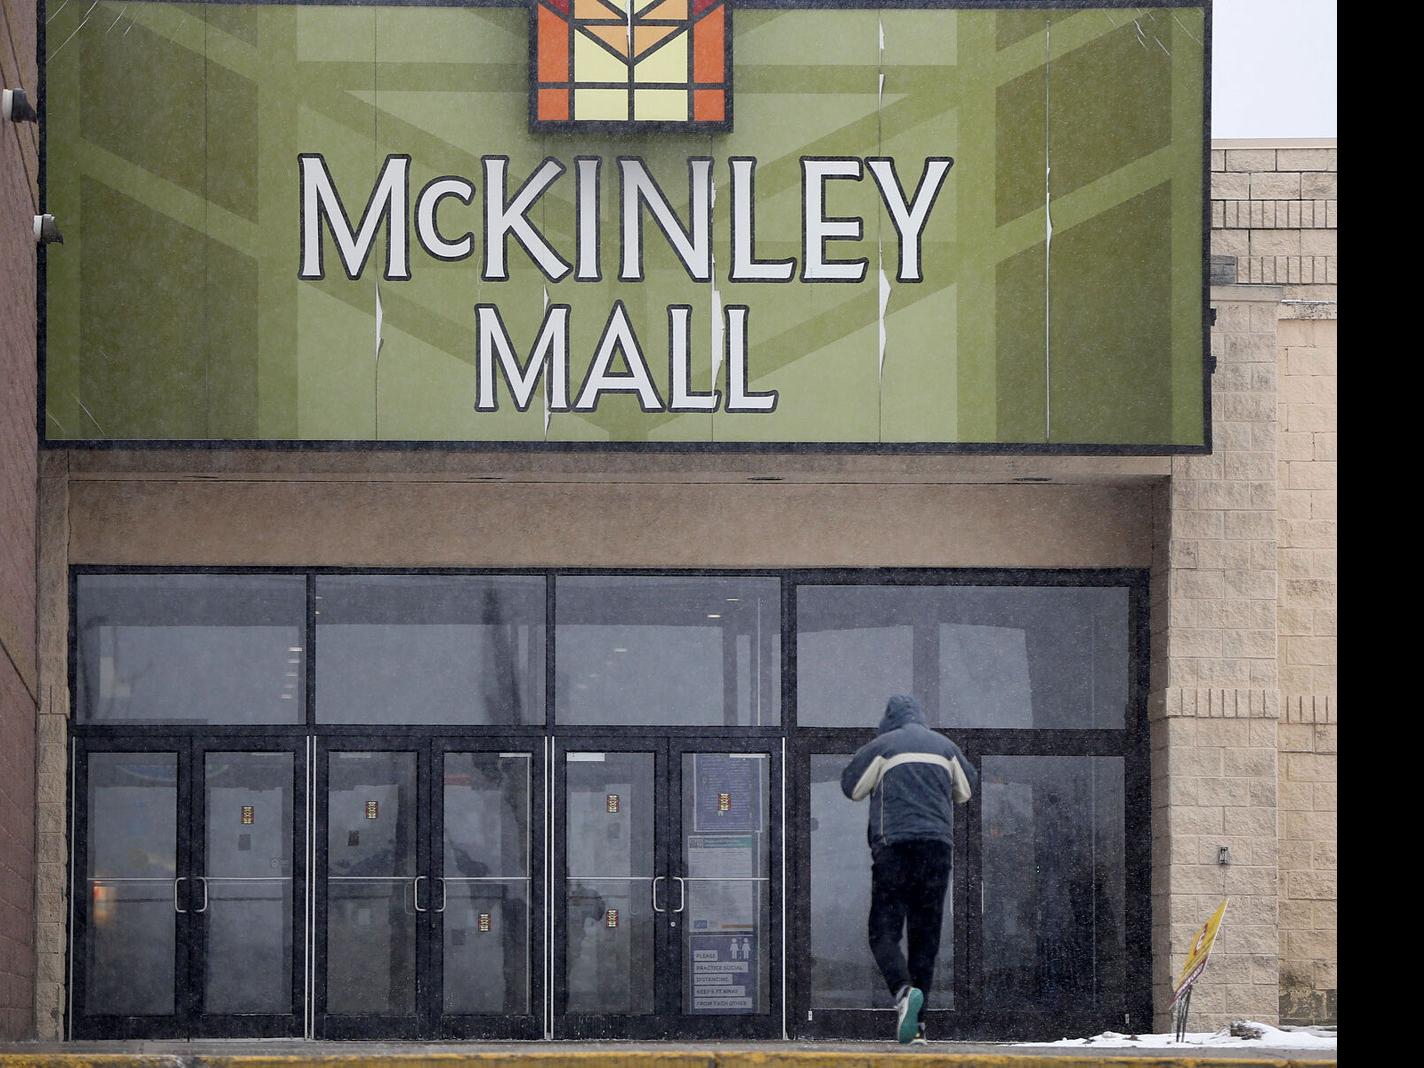 Buffalo area malls their toughest times yet as stores leave in | News buffalonews.com